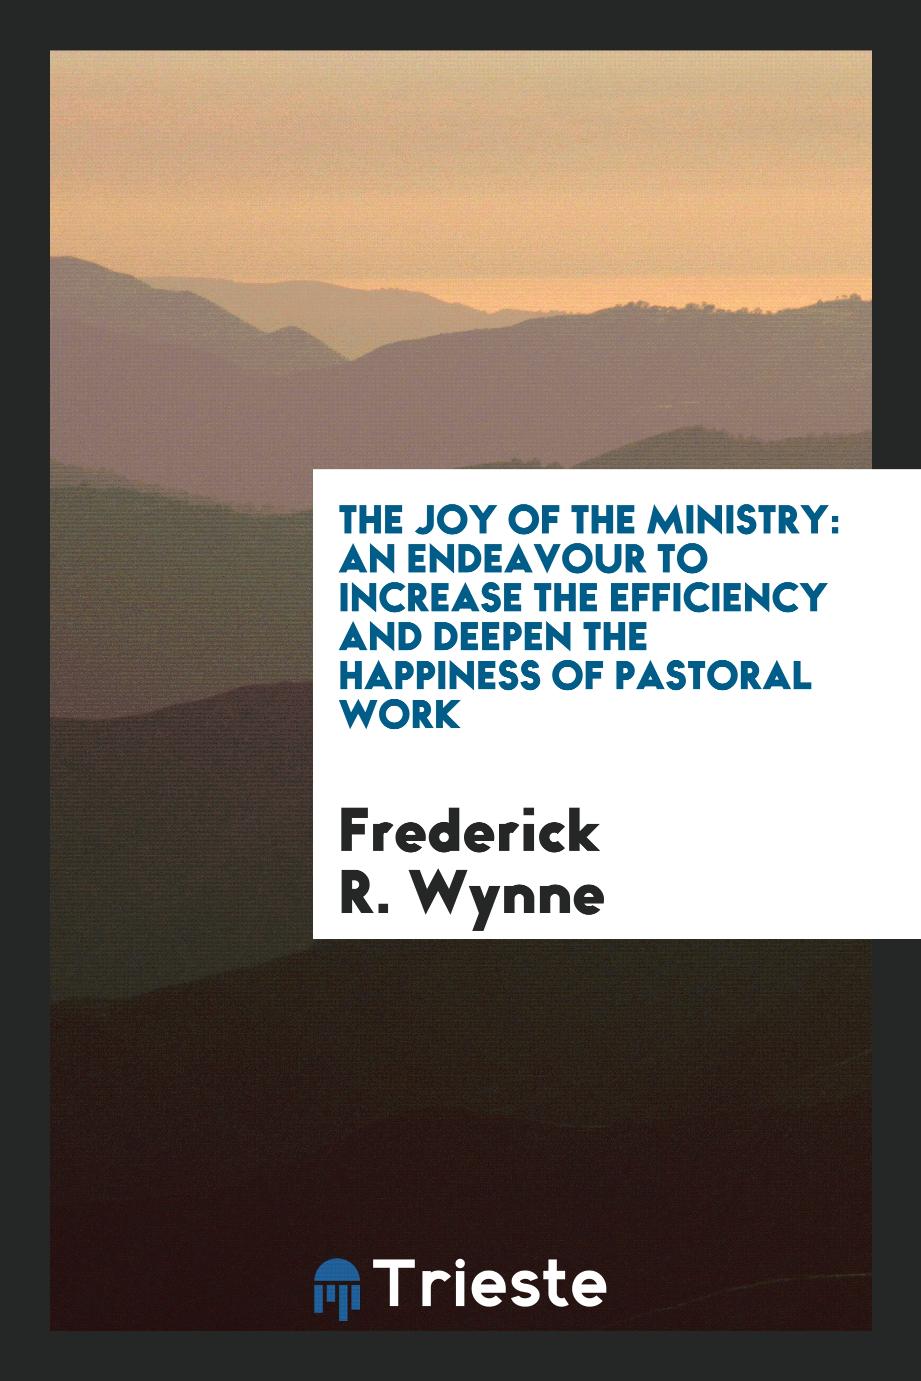 The Joy of the Ministry: An Endeavour to Increase the Efficiency and Deepen the Happiness of Pastoral Work